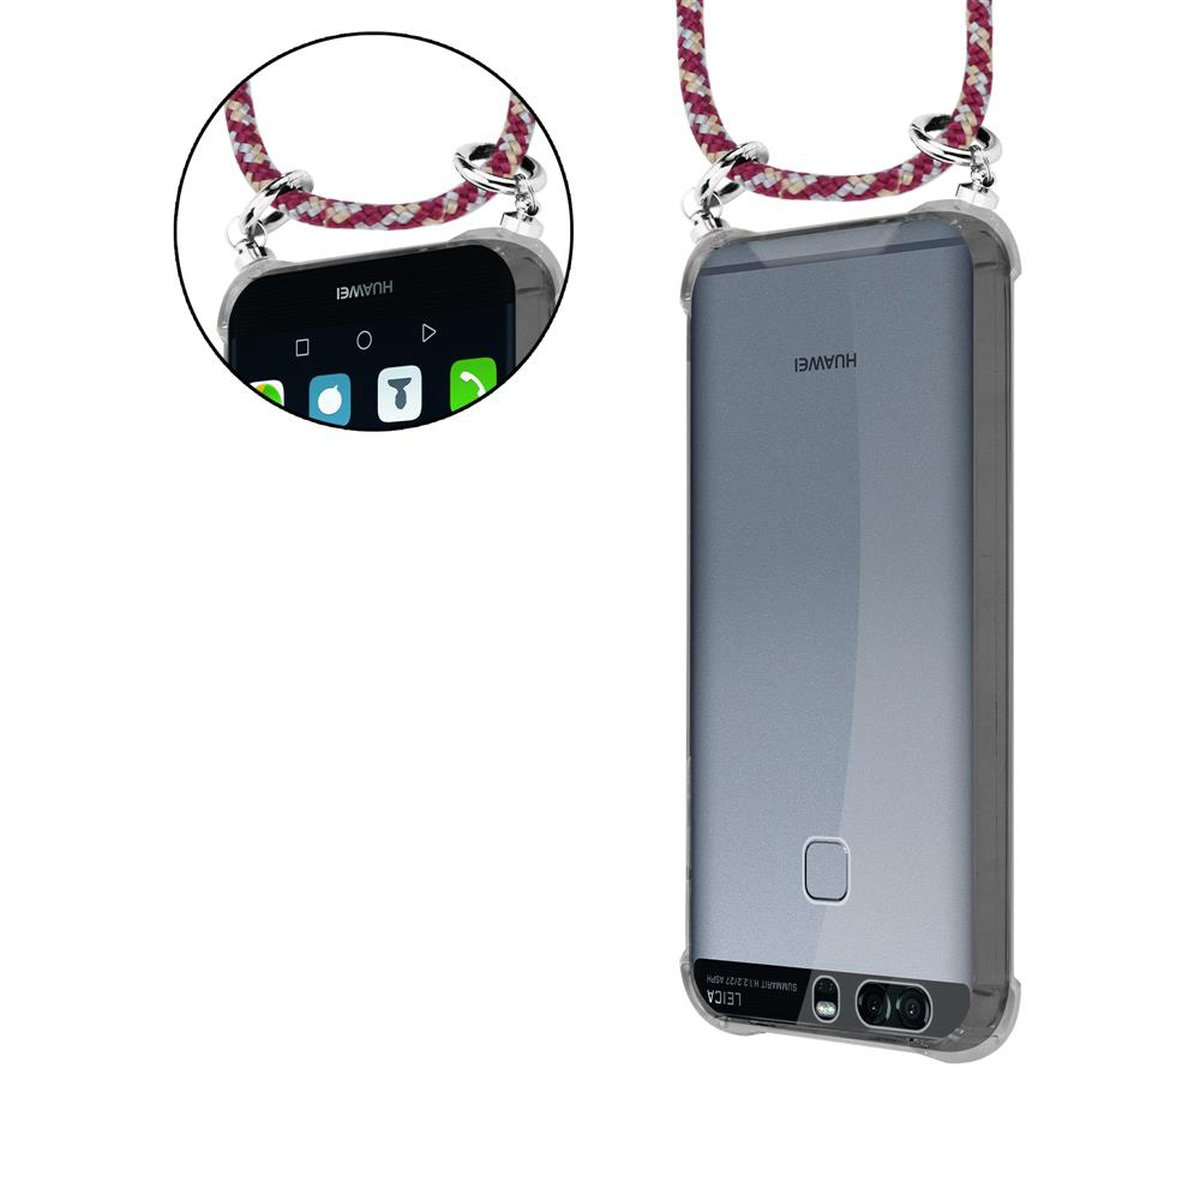 CADORABO Handy Kette mit Silber Hülle, Huawei, Band abnehmbarer GELB Ringen, Backcover, Kordel P9, WEIß ROT und